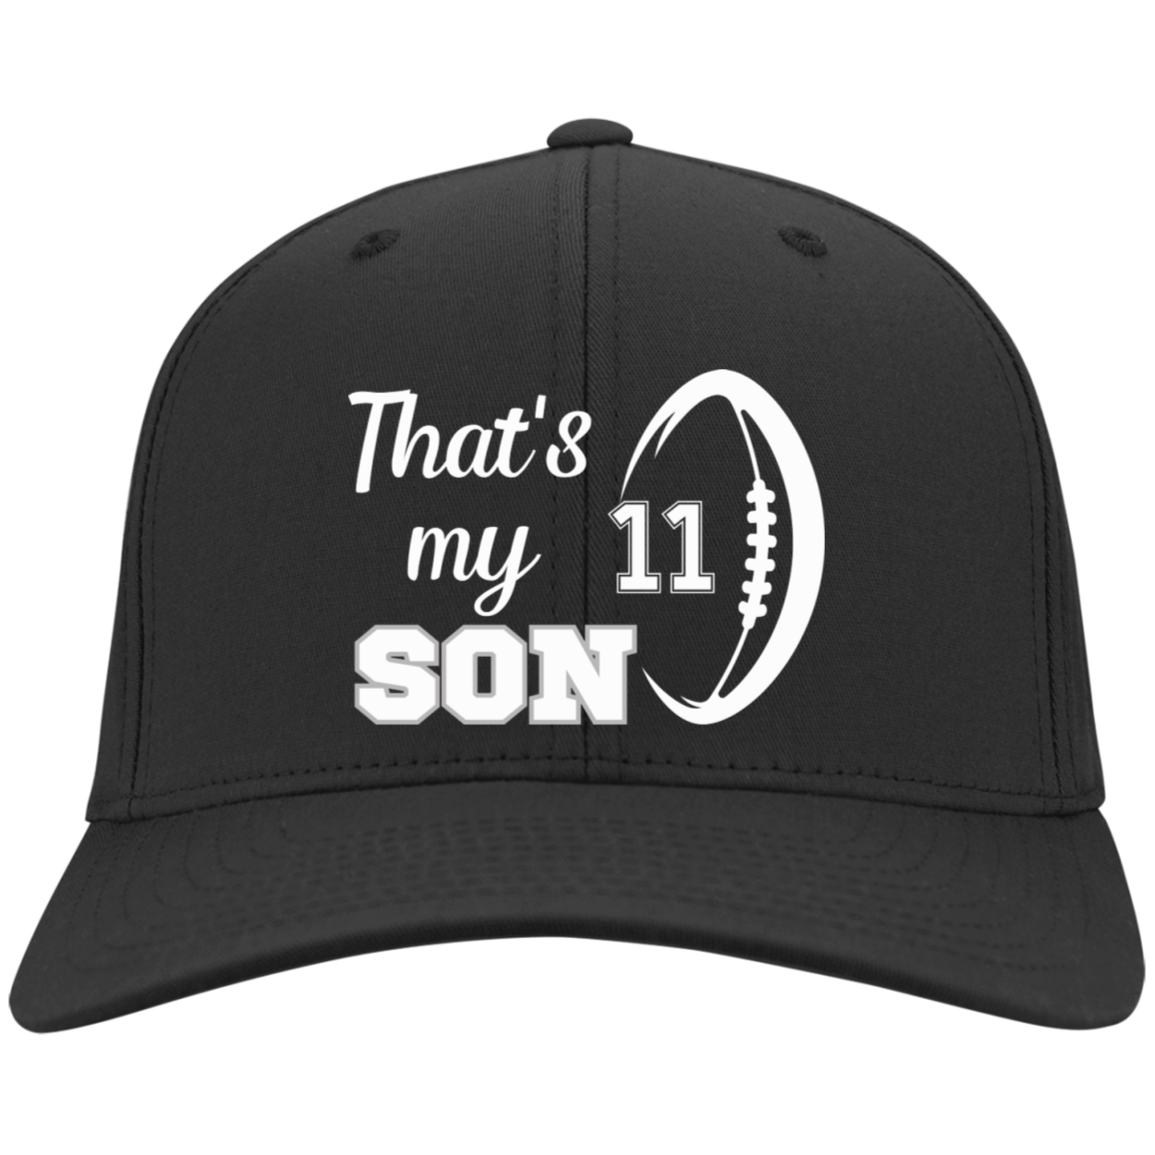 That's my son football hat  Embroidered Twill Cap